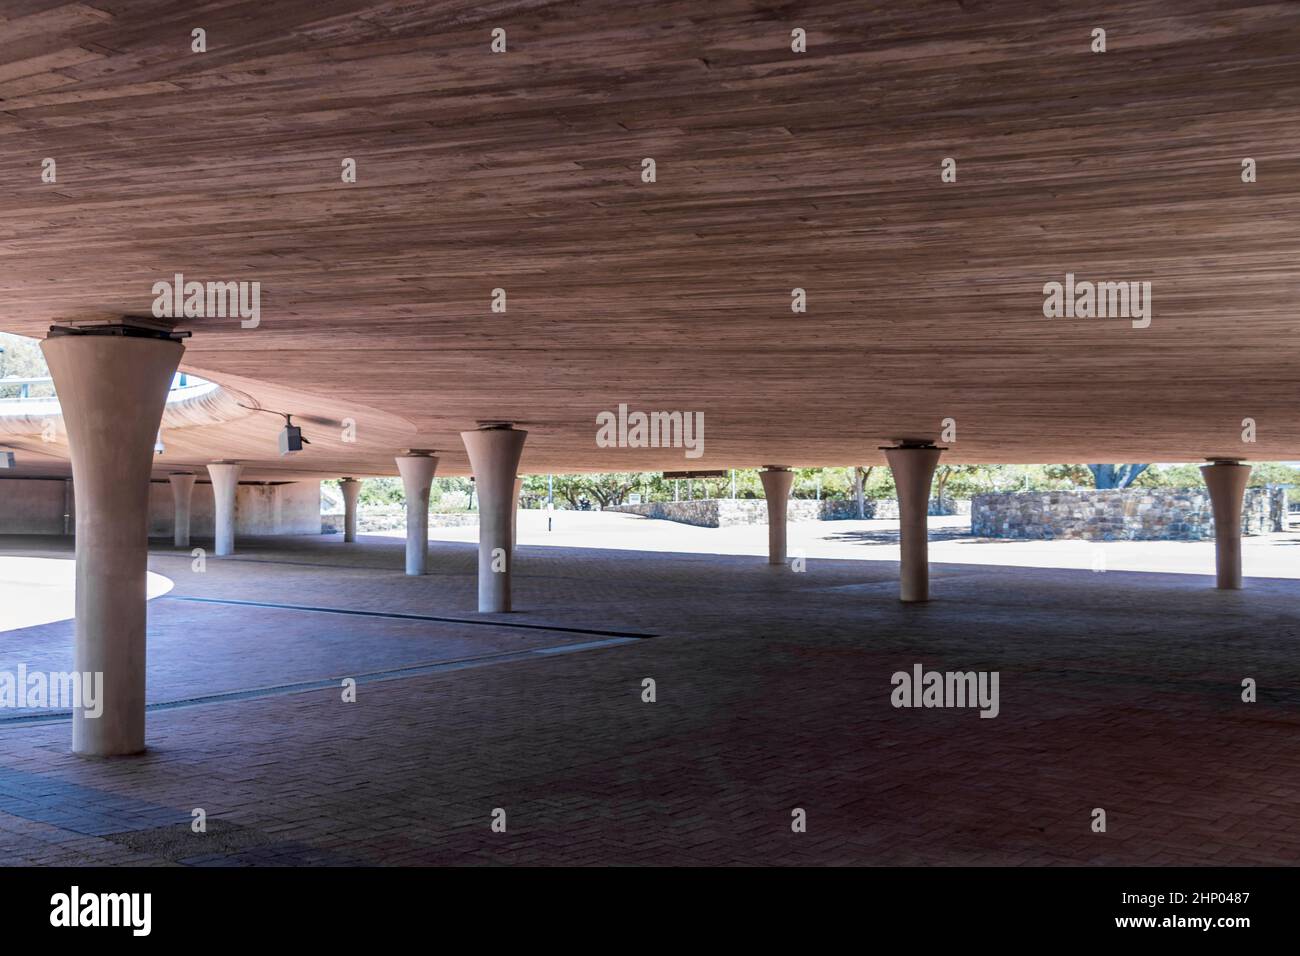 Under the Granger Bay Blvd roundabout at Cape Town Stadium in South Africa. Stock Photo